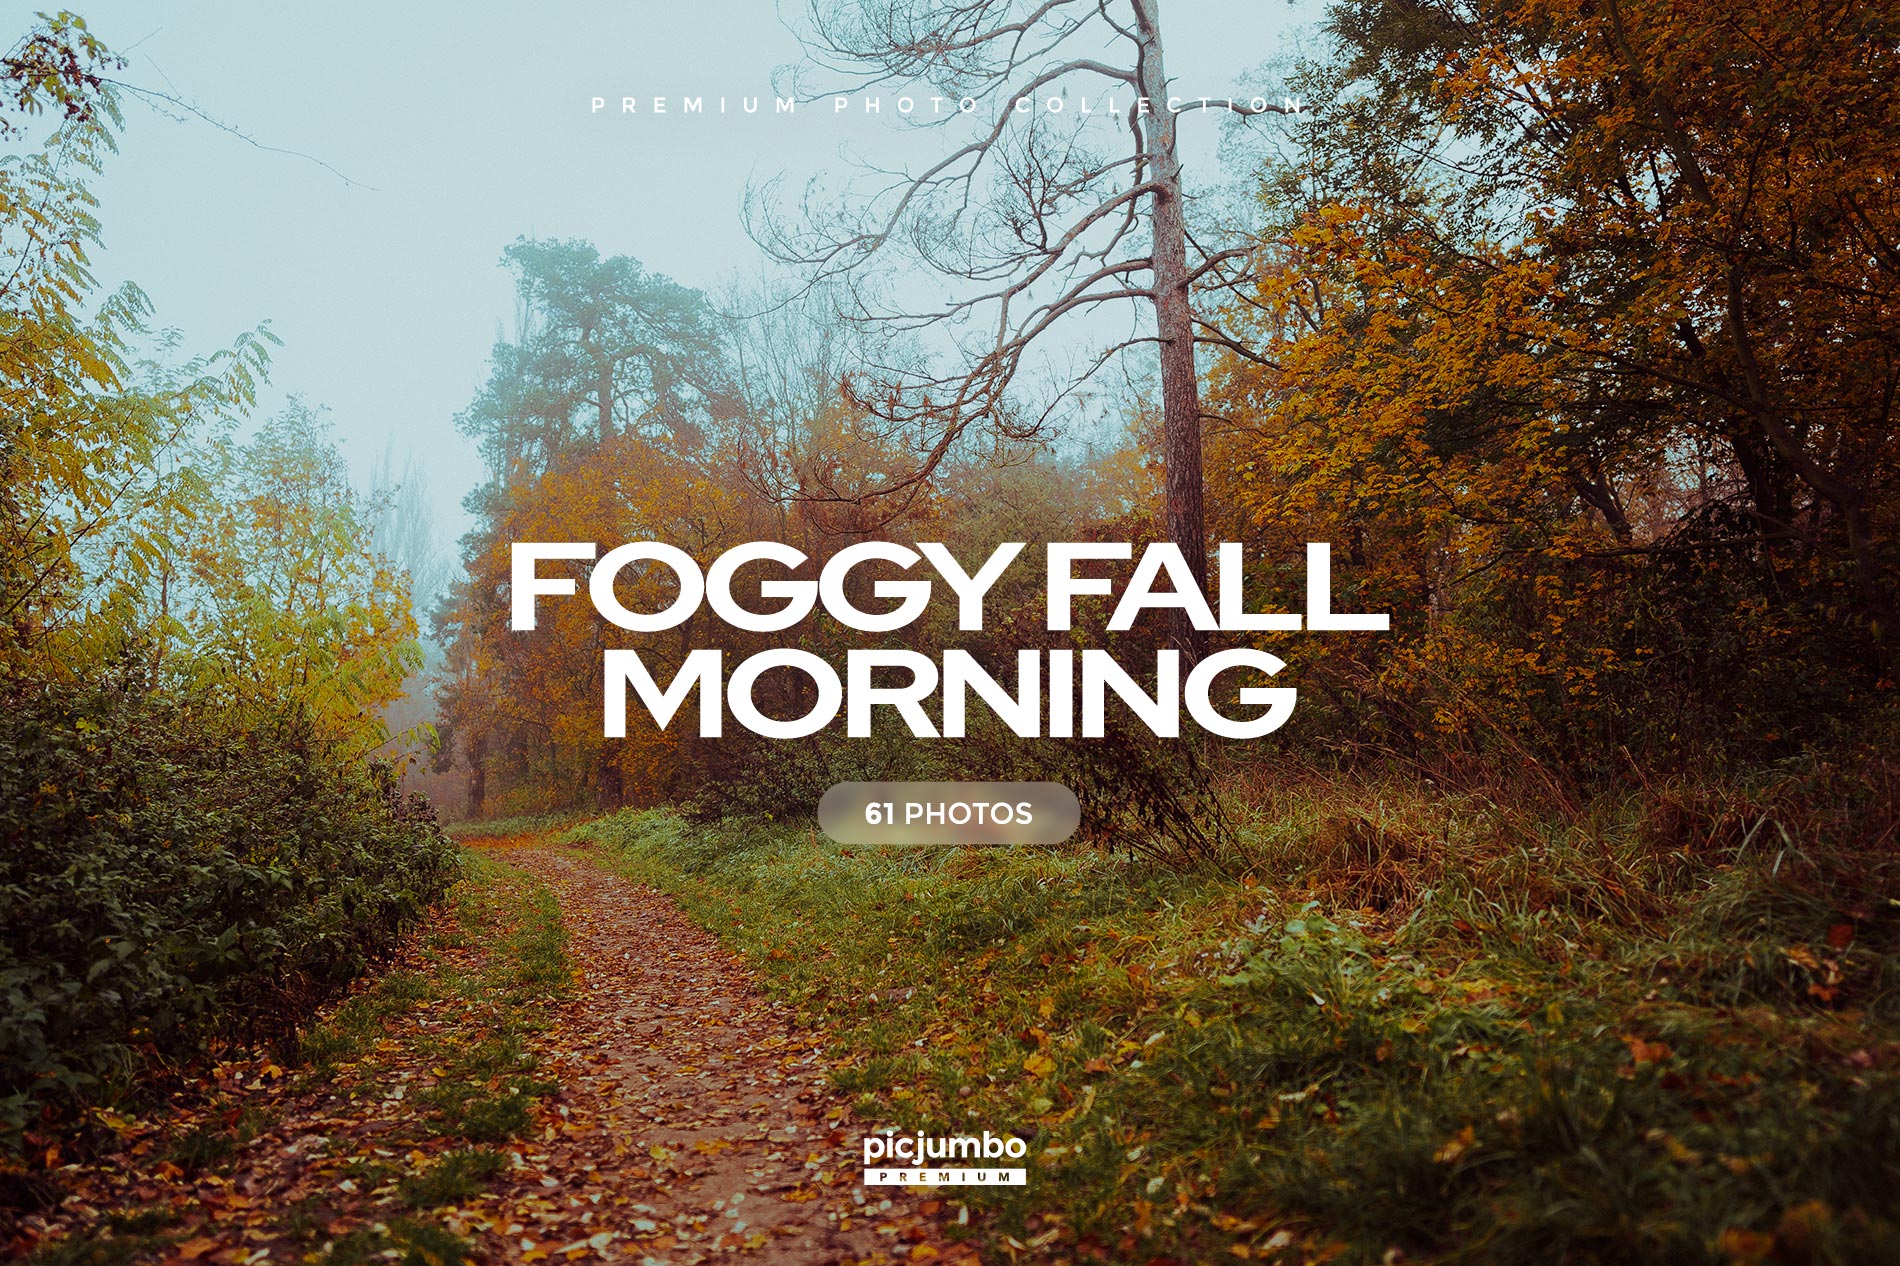 Download hi-res stock photos from our Foggy Fall Morning PREMIUM Collection!